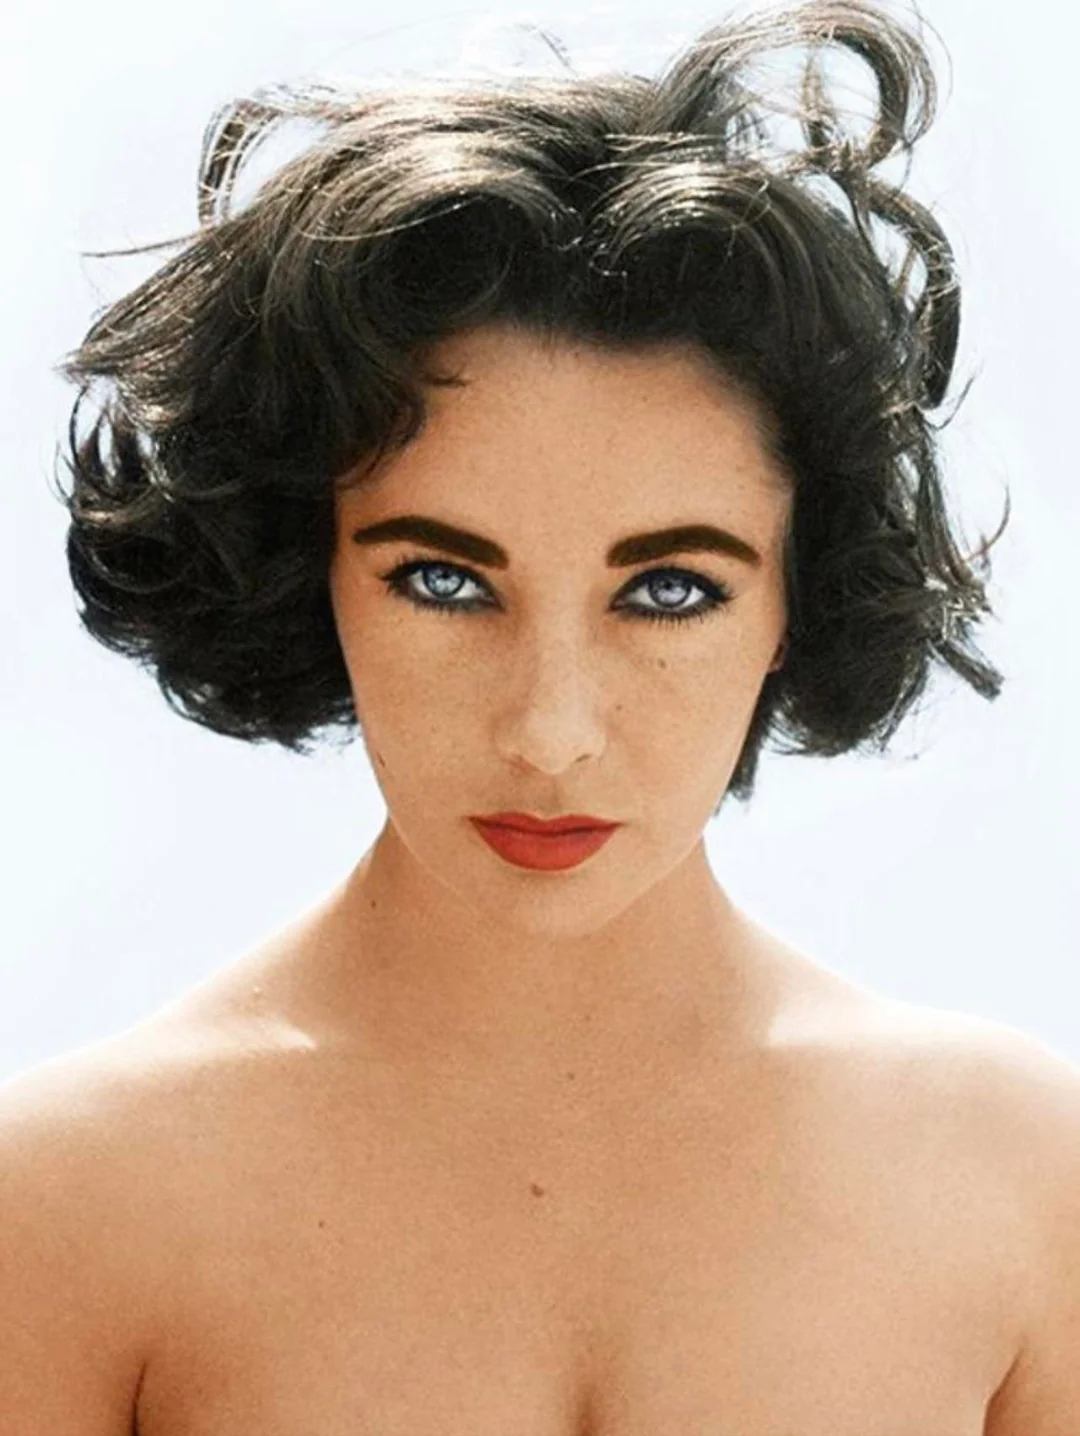 Elizabeth Taylor: Dazzling photos of the classic Hollywood icon